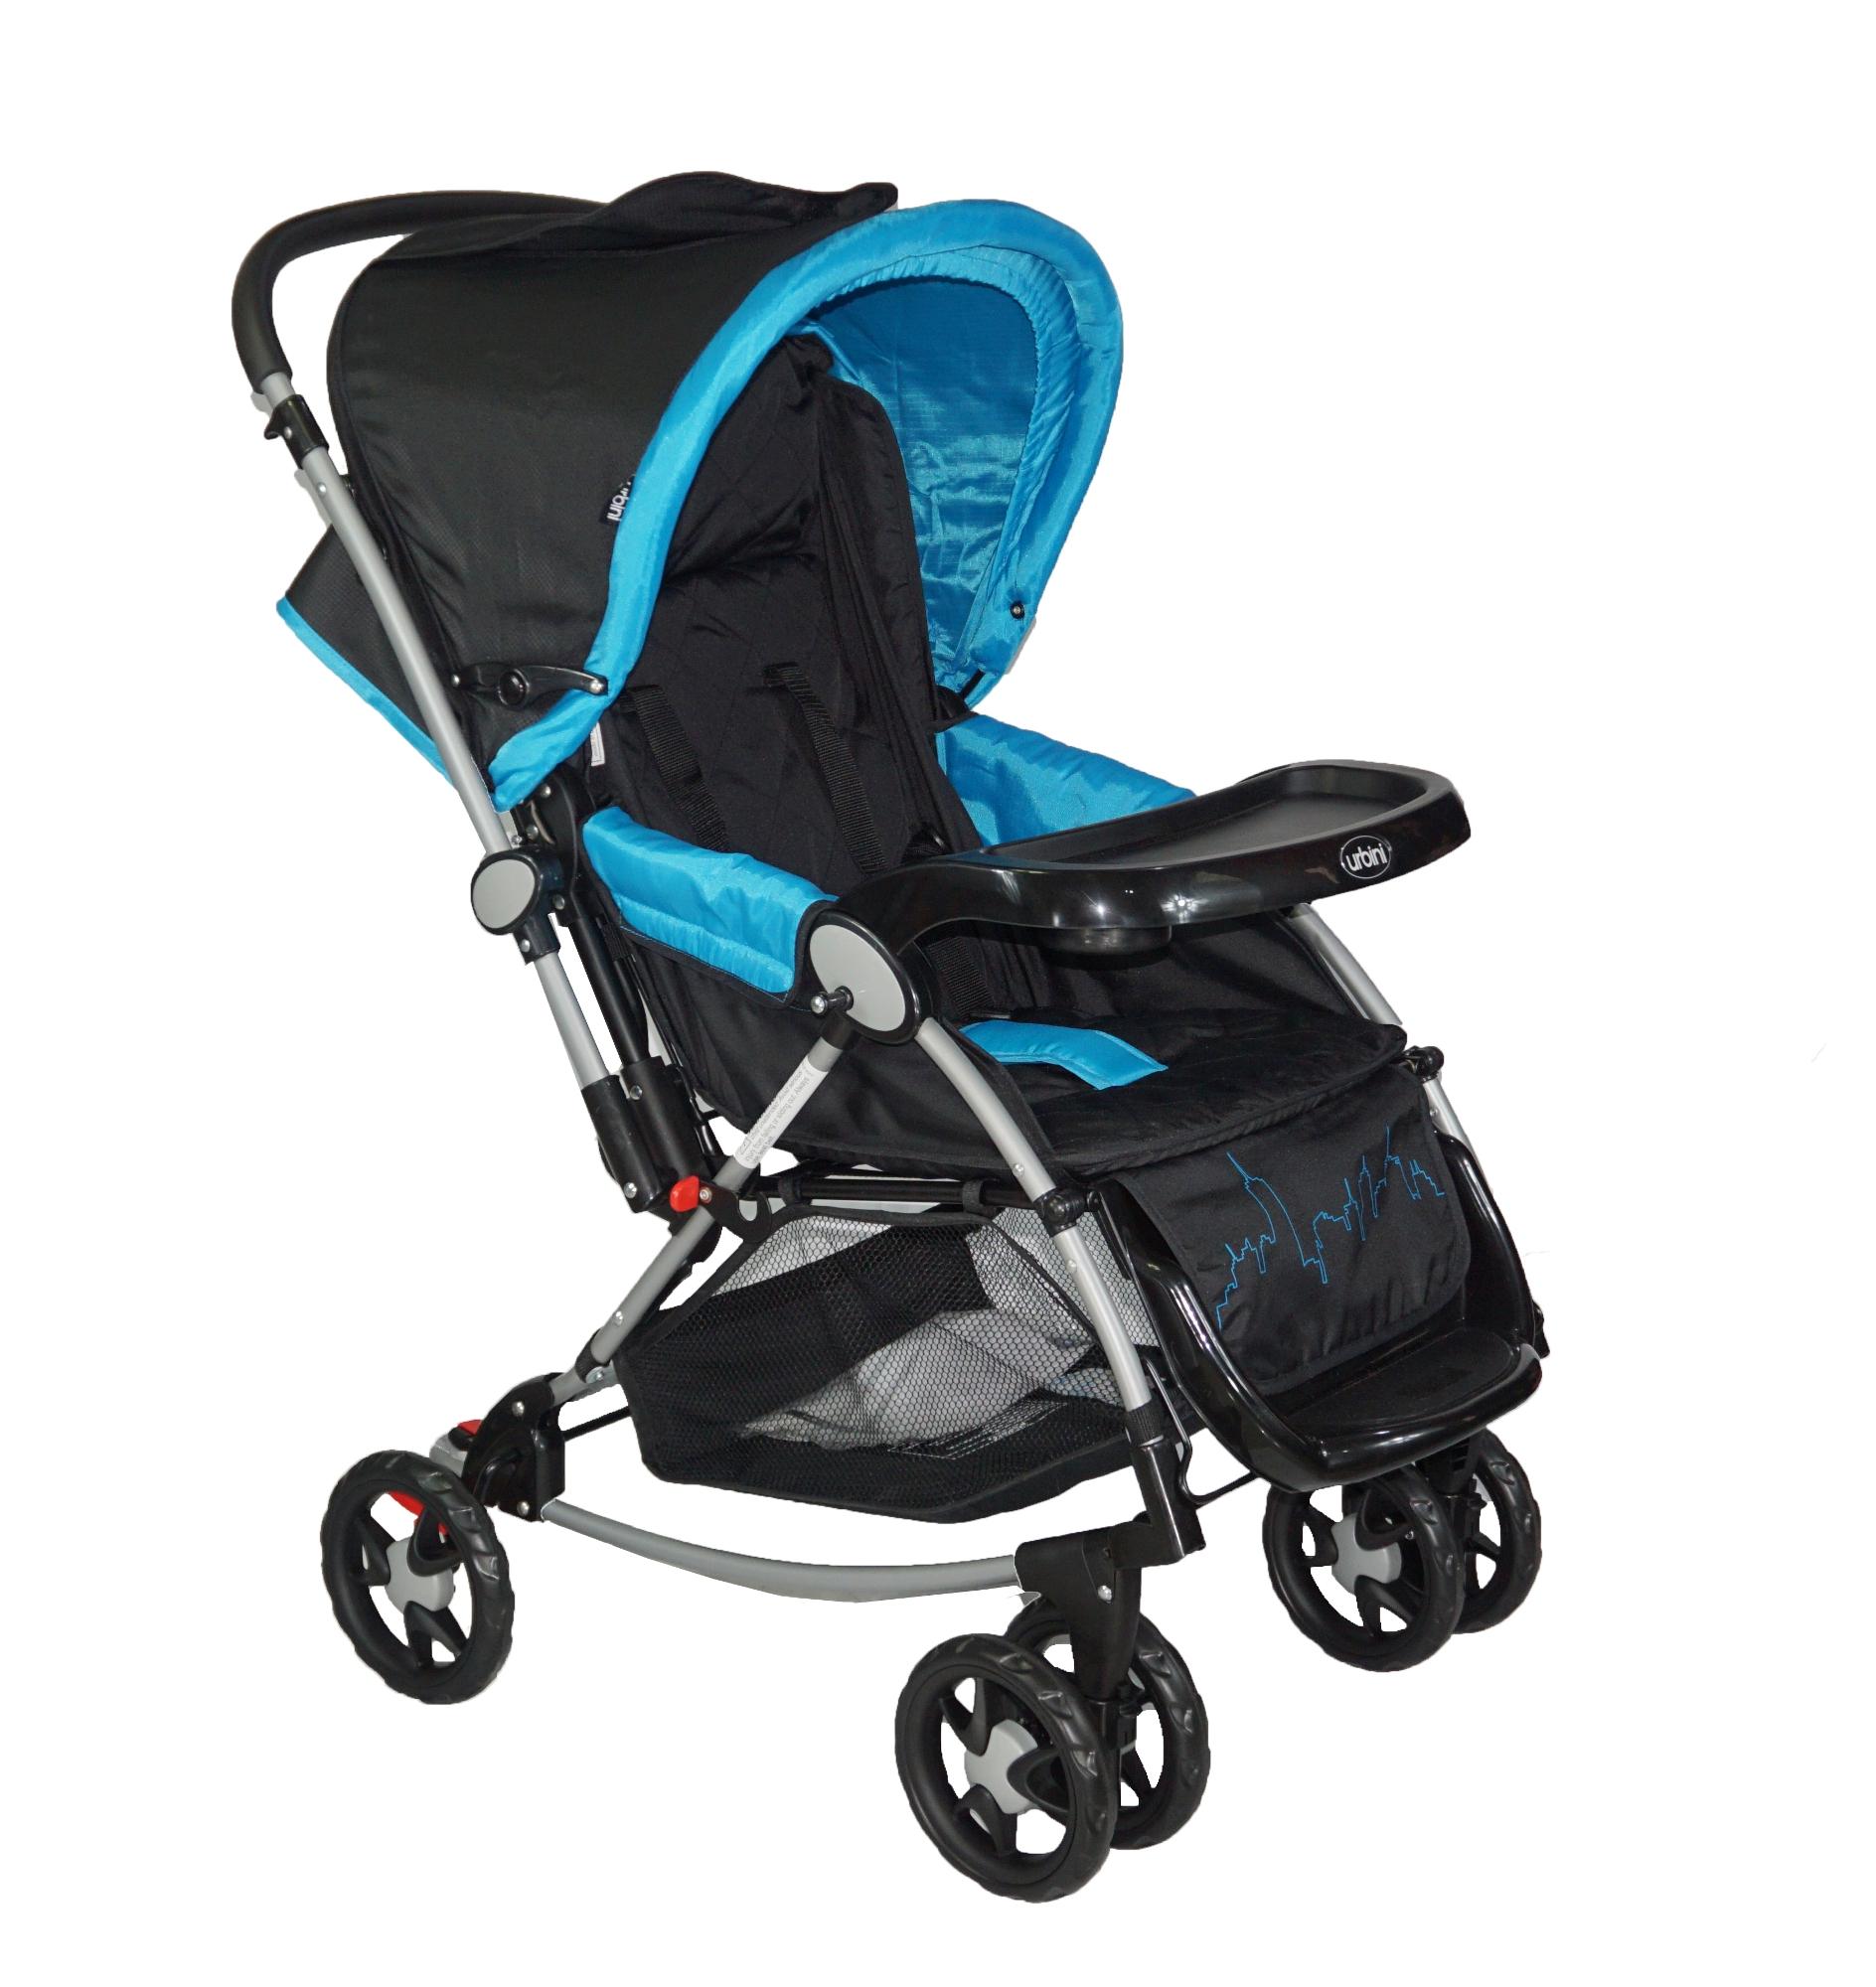 Goodbaby Baby Strollers Philippines 